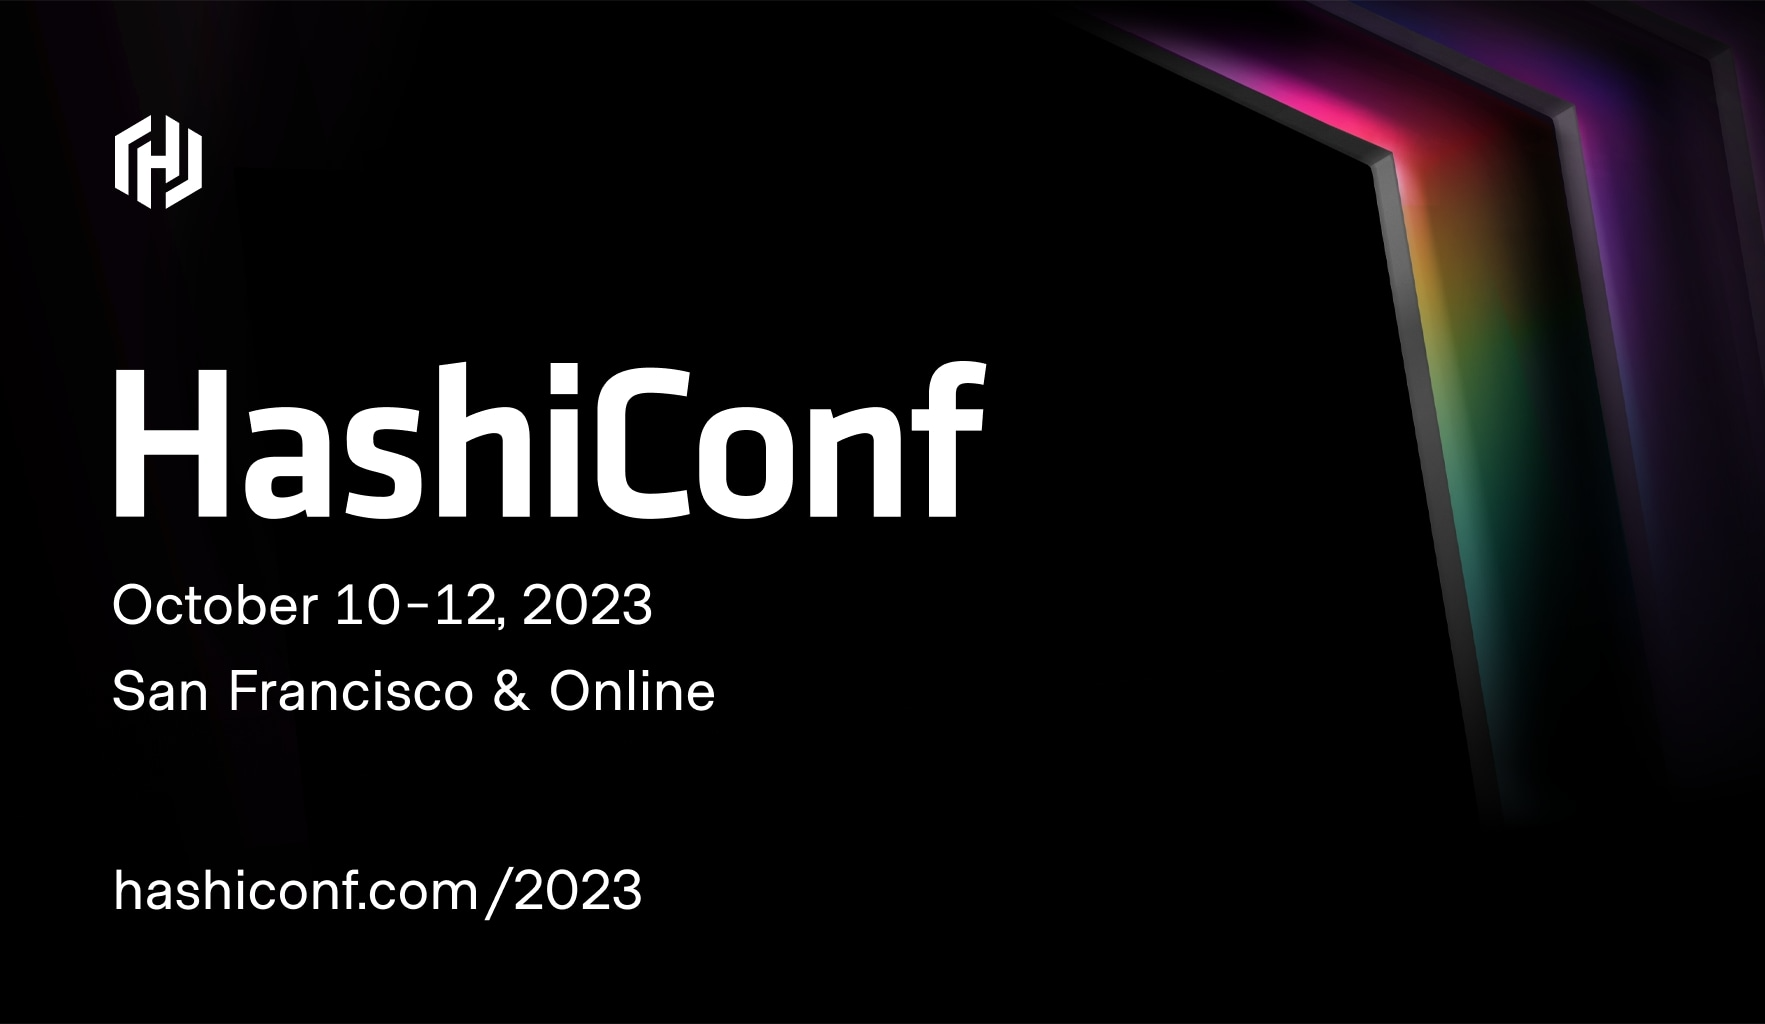 Infrastructure and security releases open HashiConf 2023